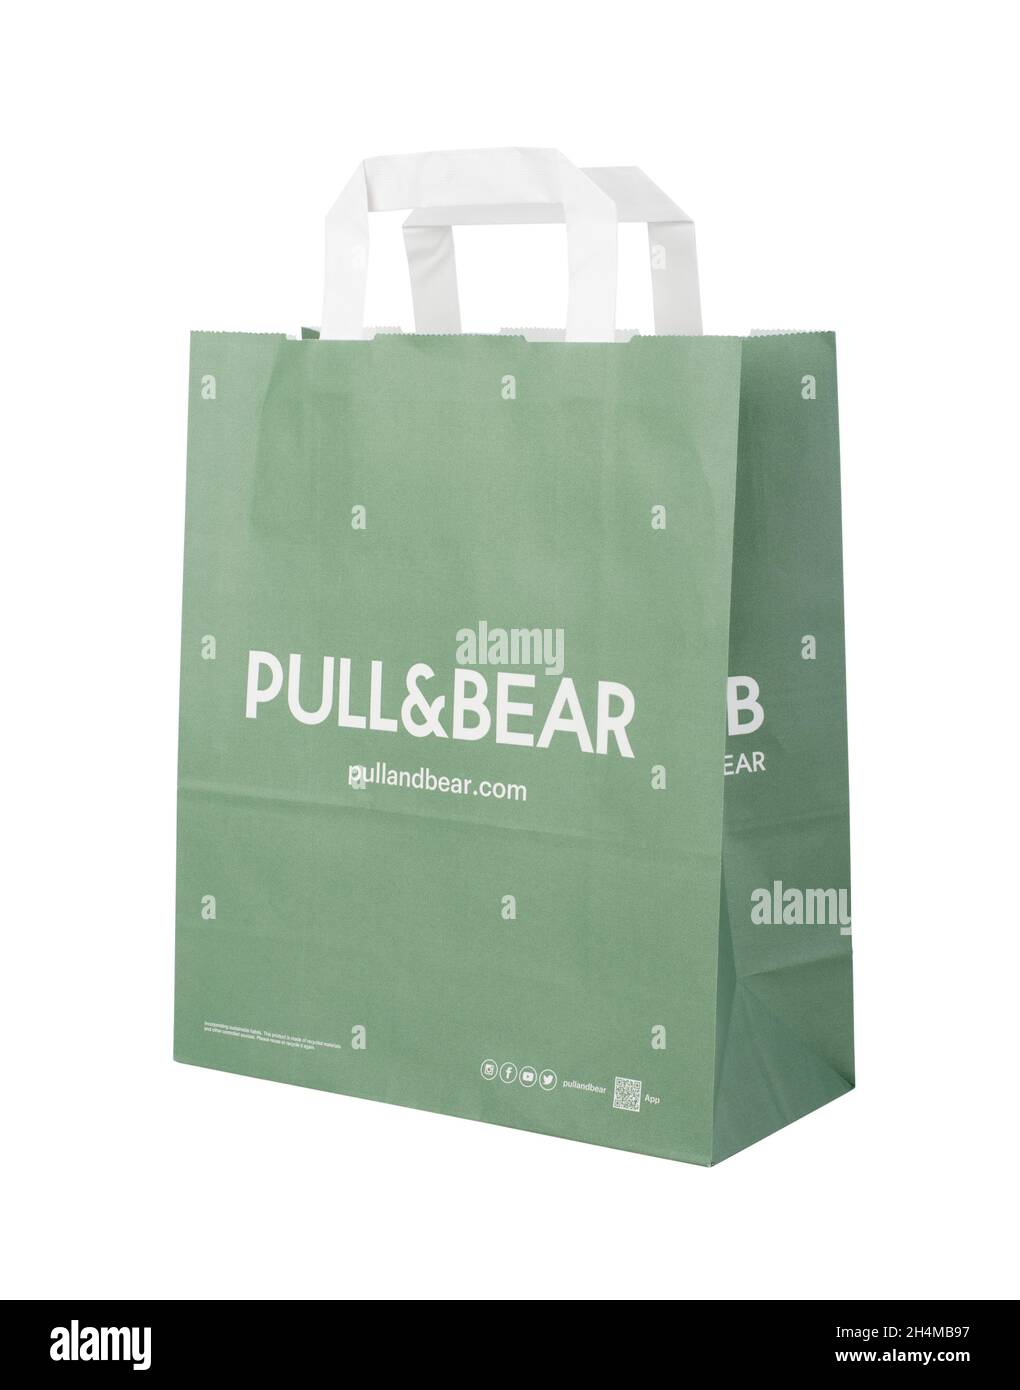 SAMARA, RUSSIA - September 13 2021: Pull & Bear green paper bag showing the logo of the spanish clothing and accessories retailer. Isolated on a white Stock Photo